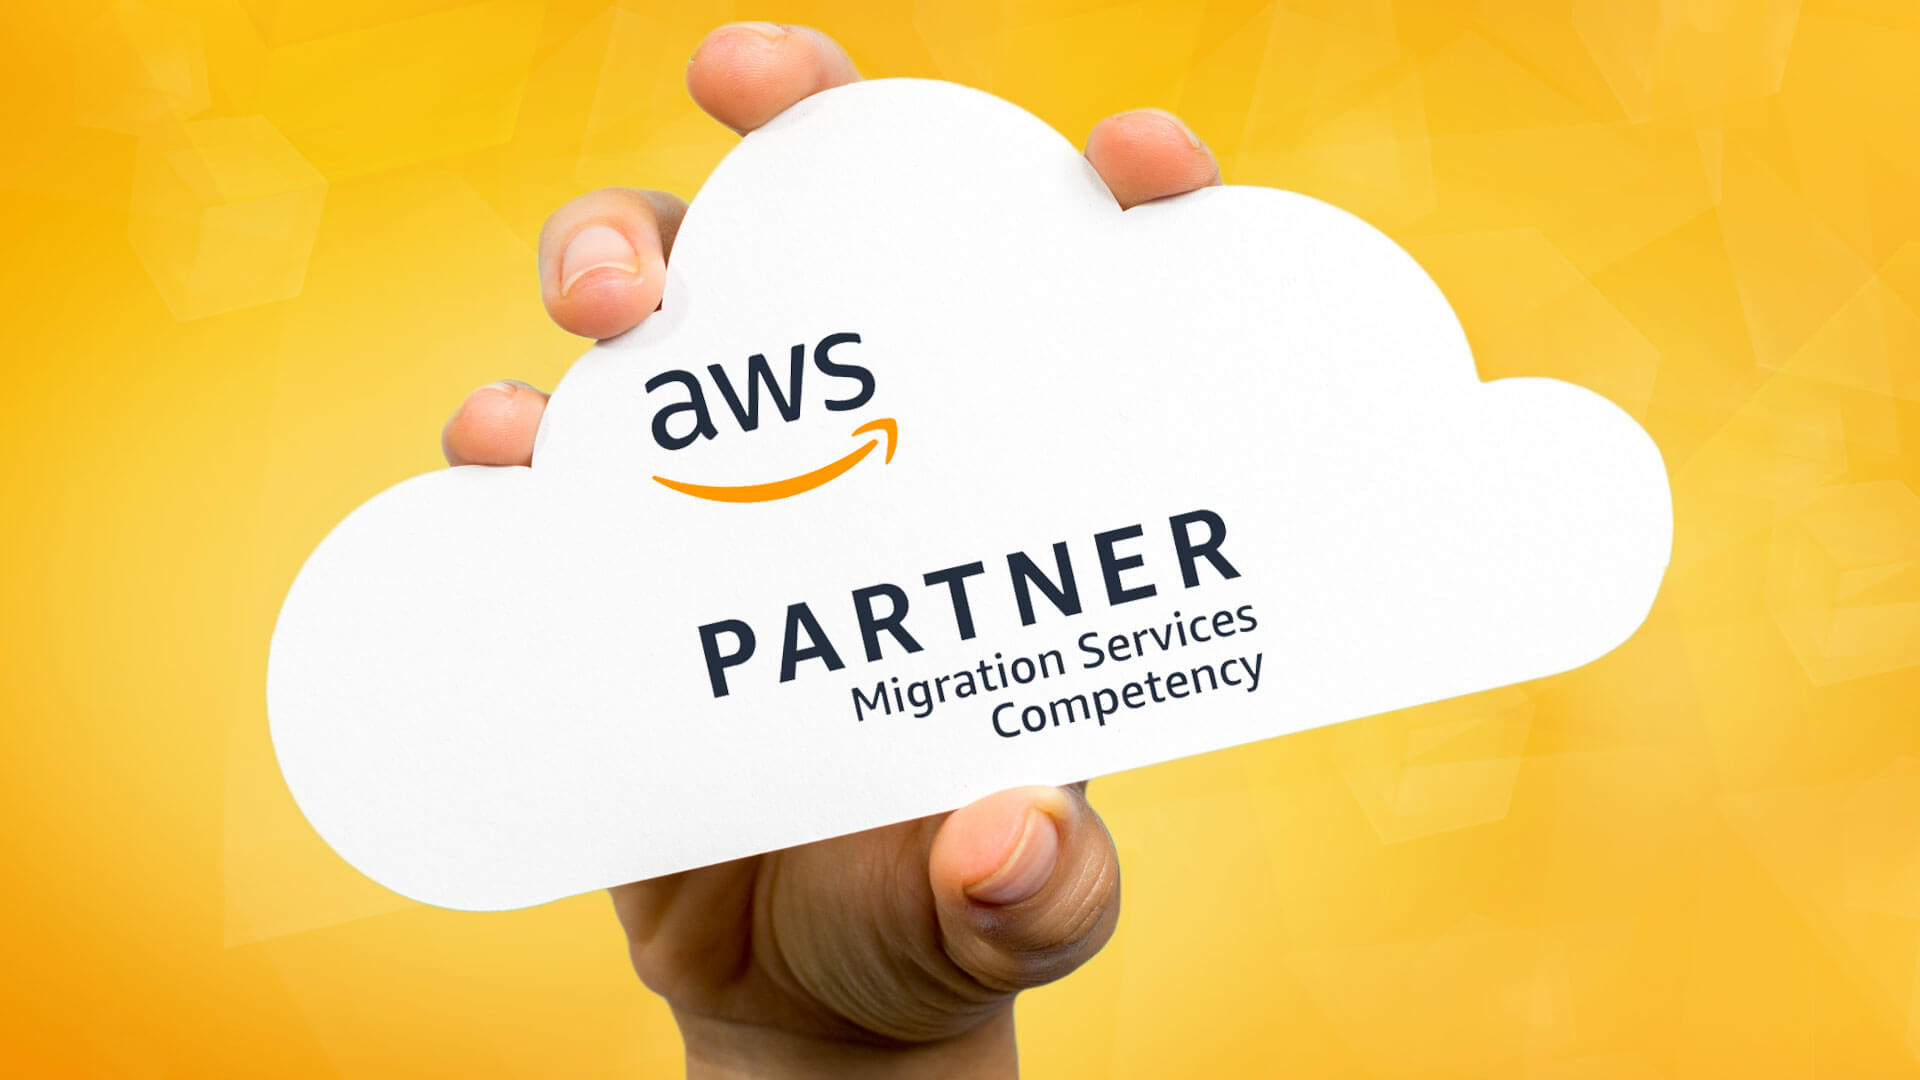 hostersi aws migration competency